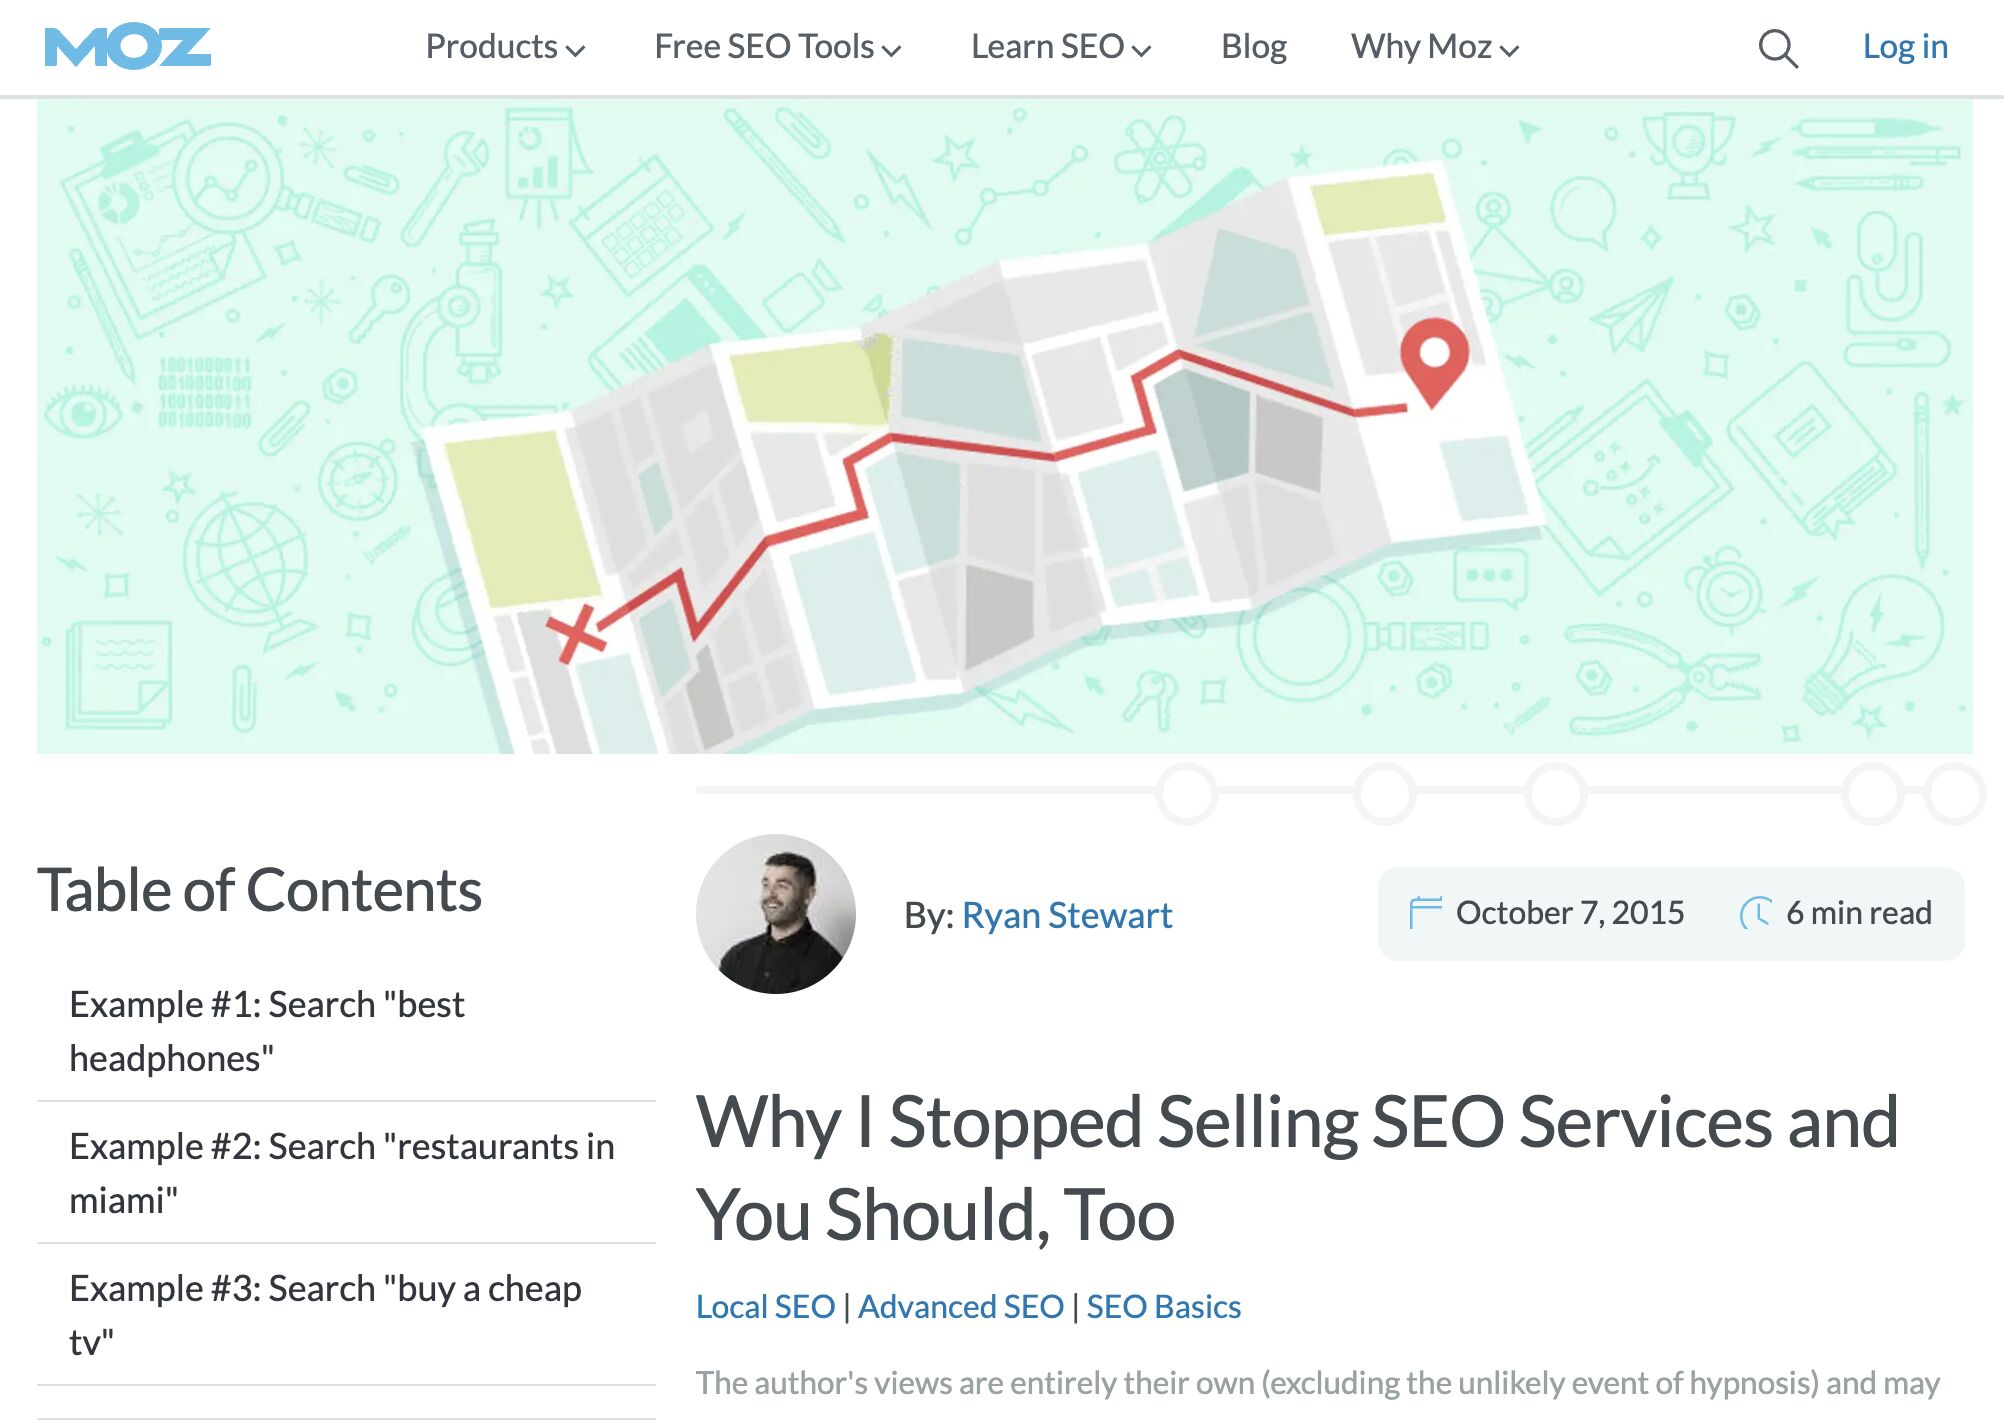 Moz's post on SEO services